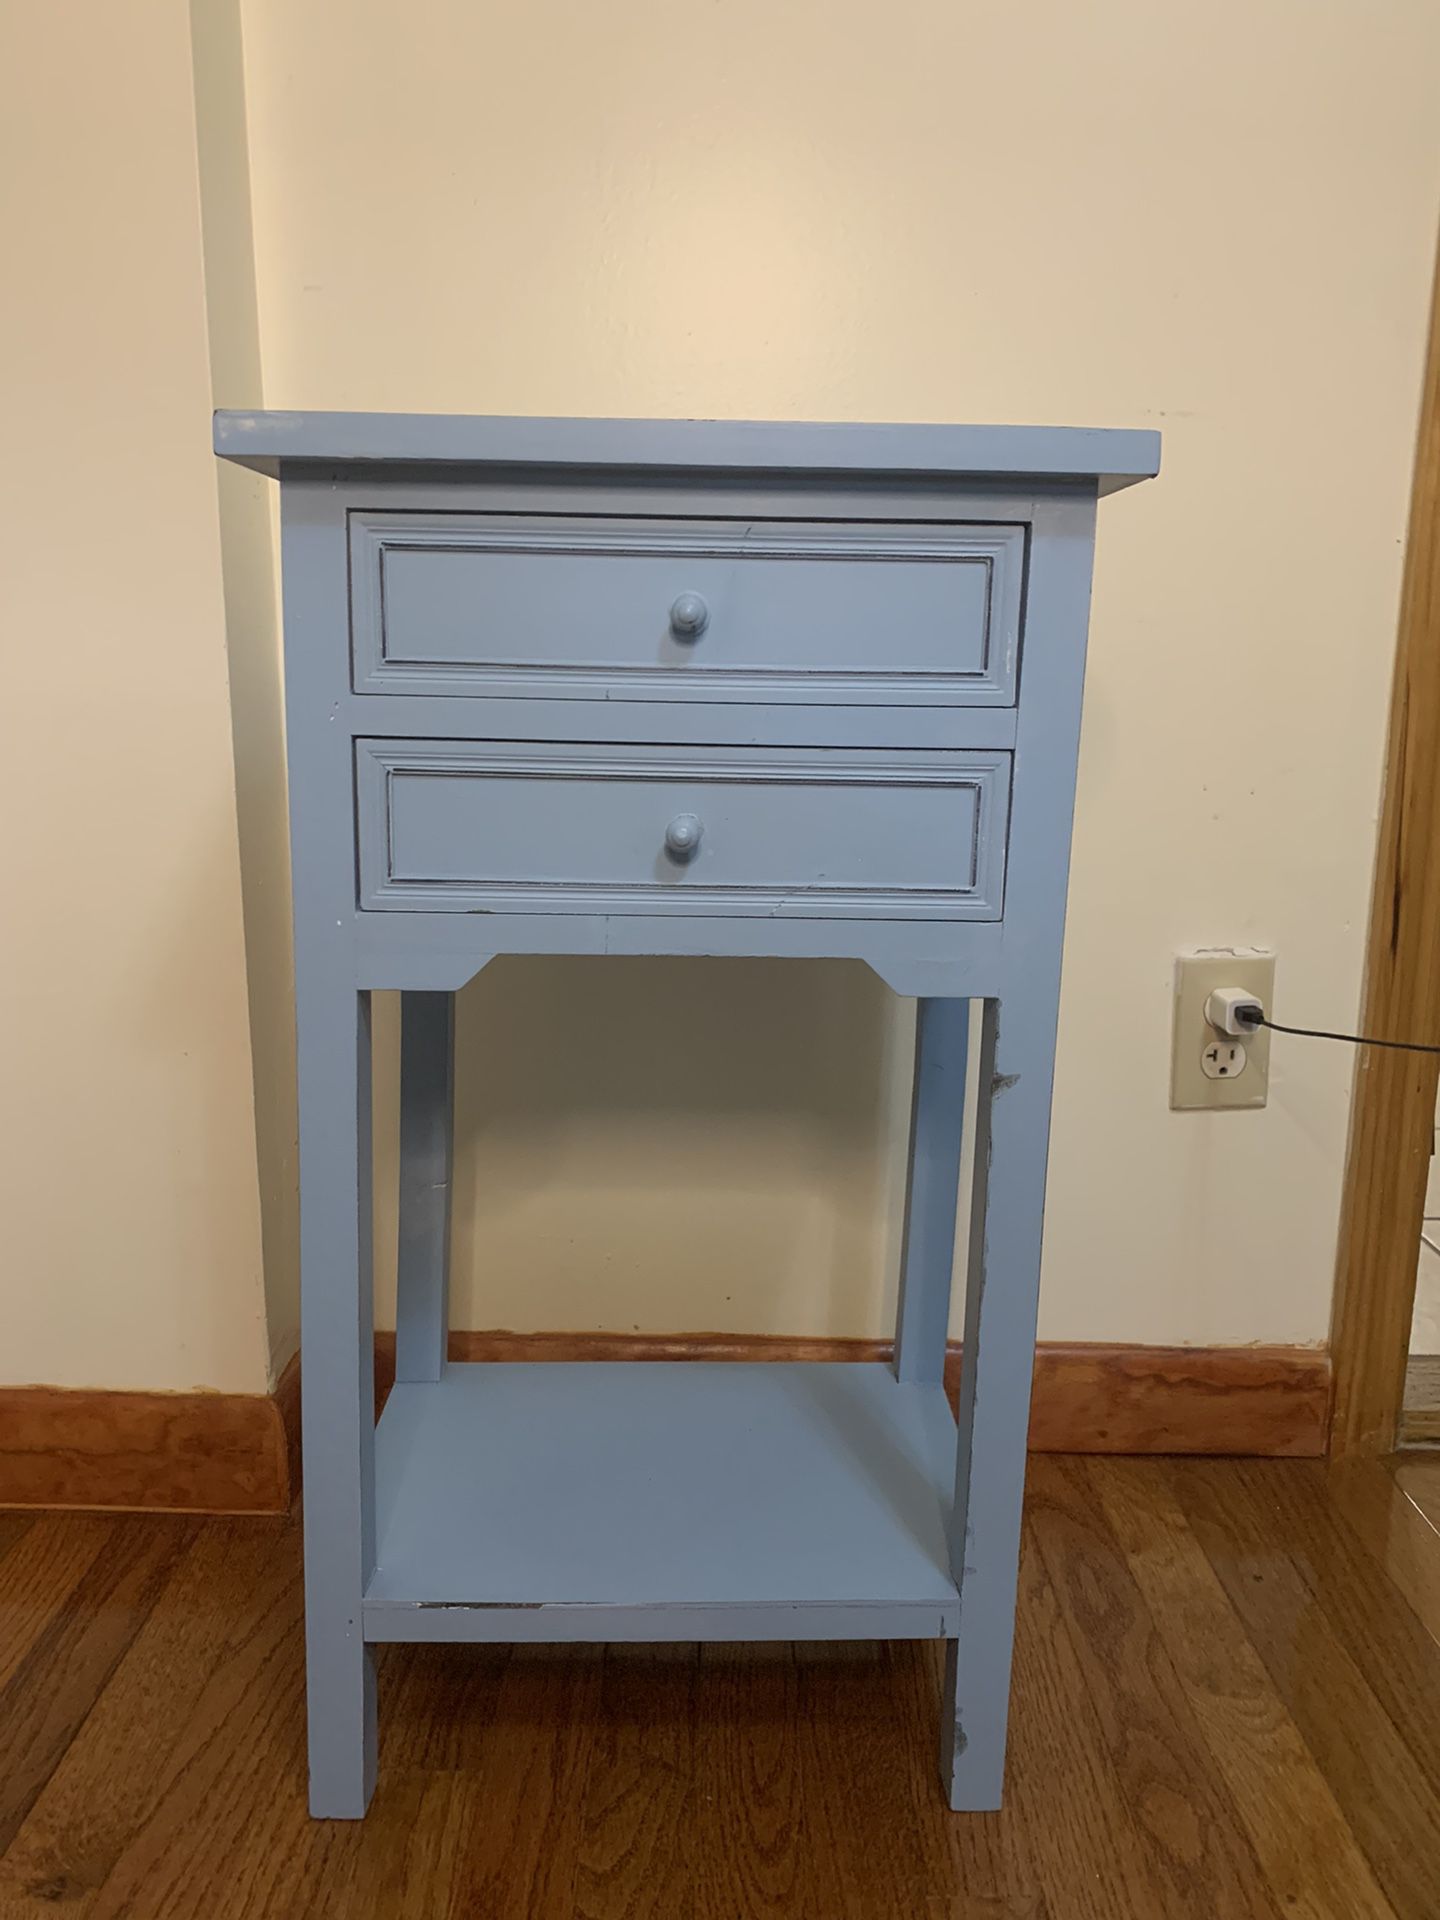 End Table with 2 drawers.